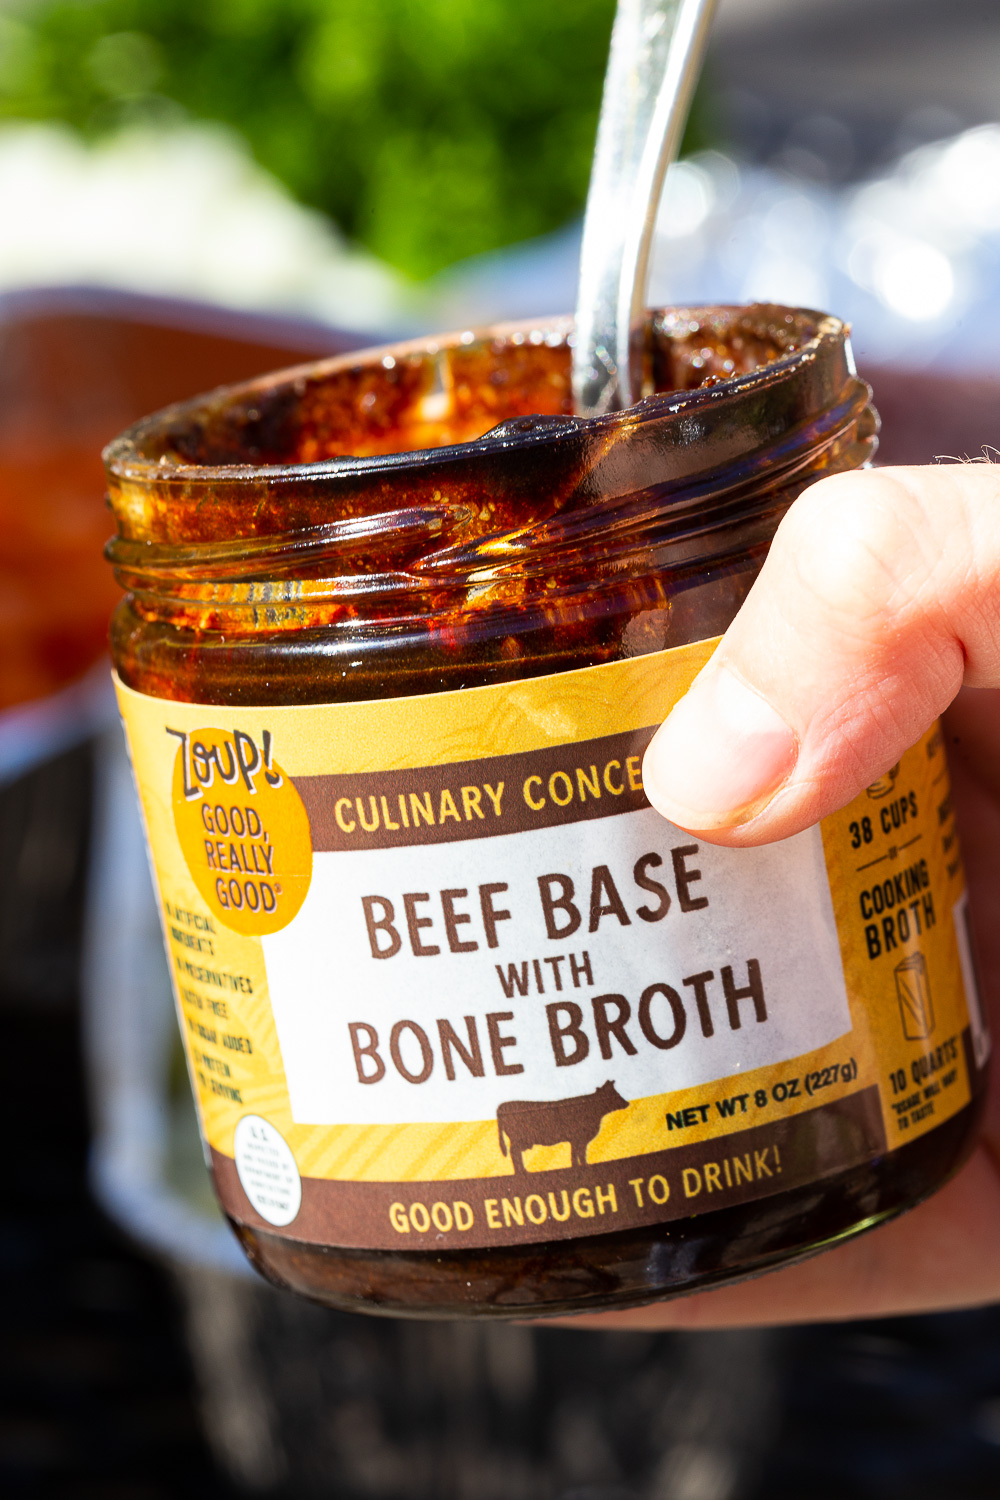 Making foil dinners with Zoup! Beef Base with bone broth